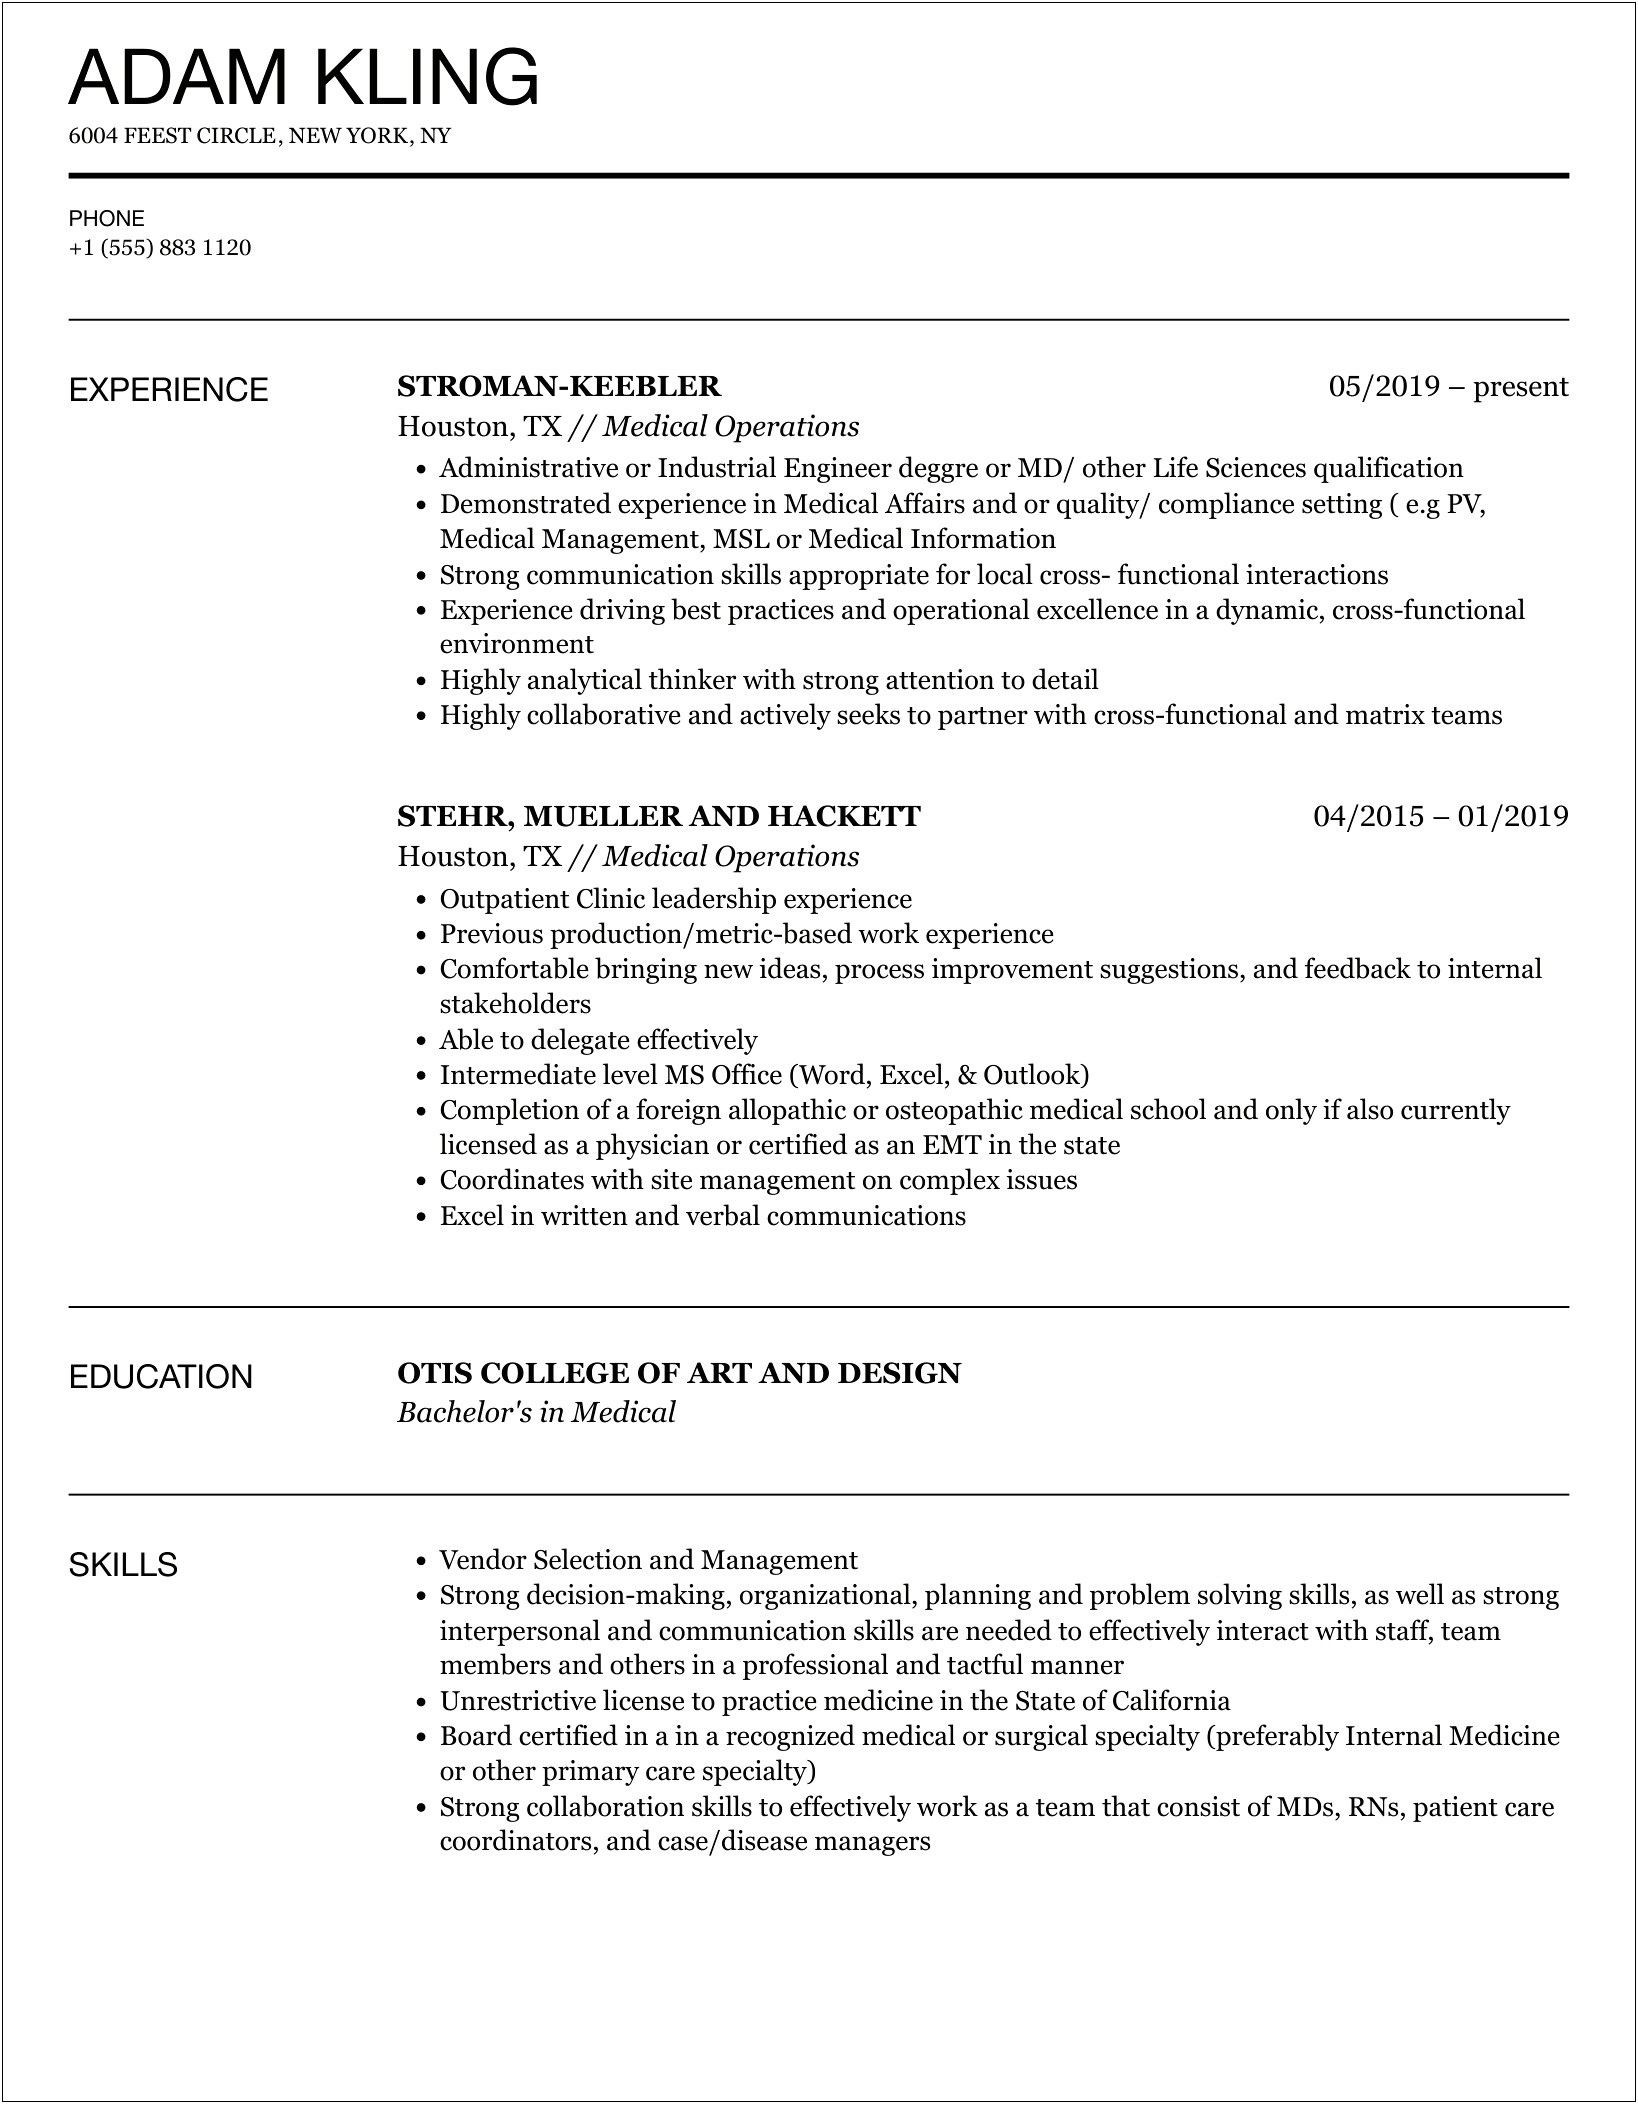 Best Resume For Medical Operations Manager